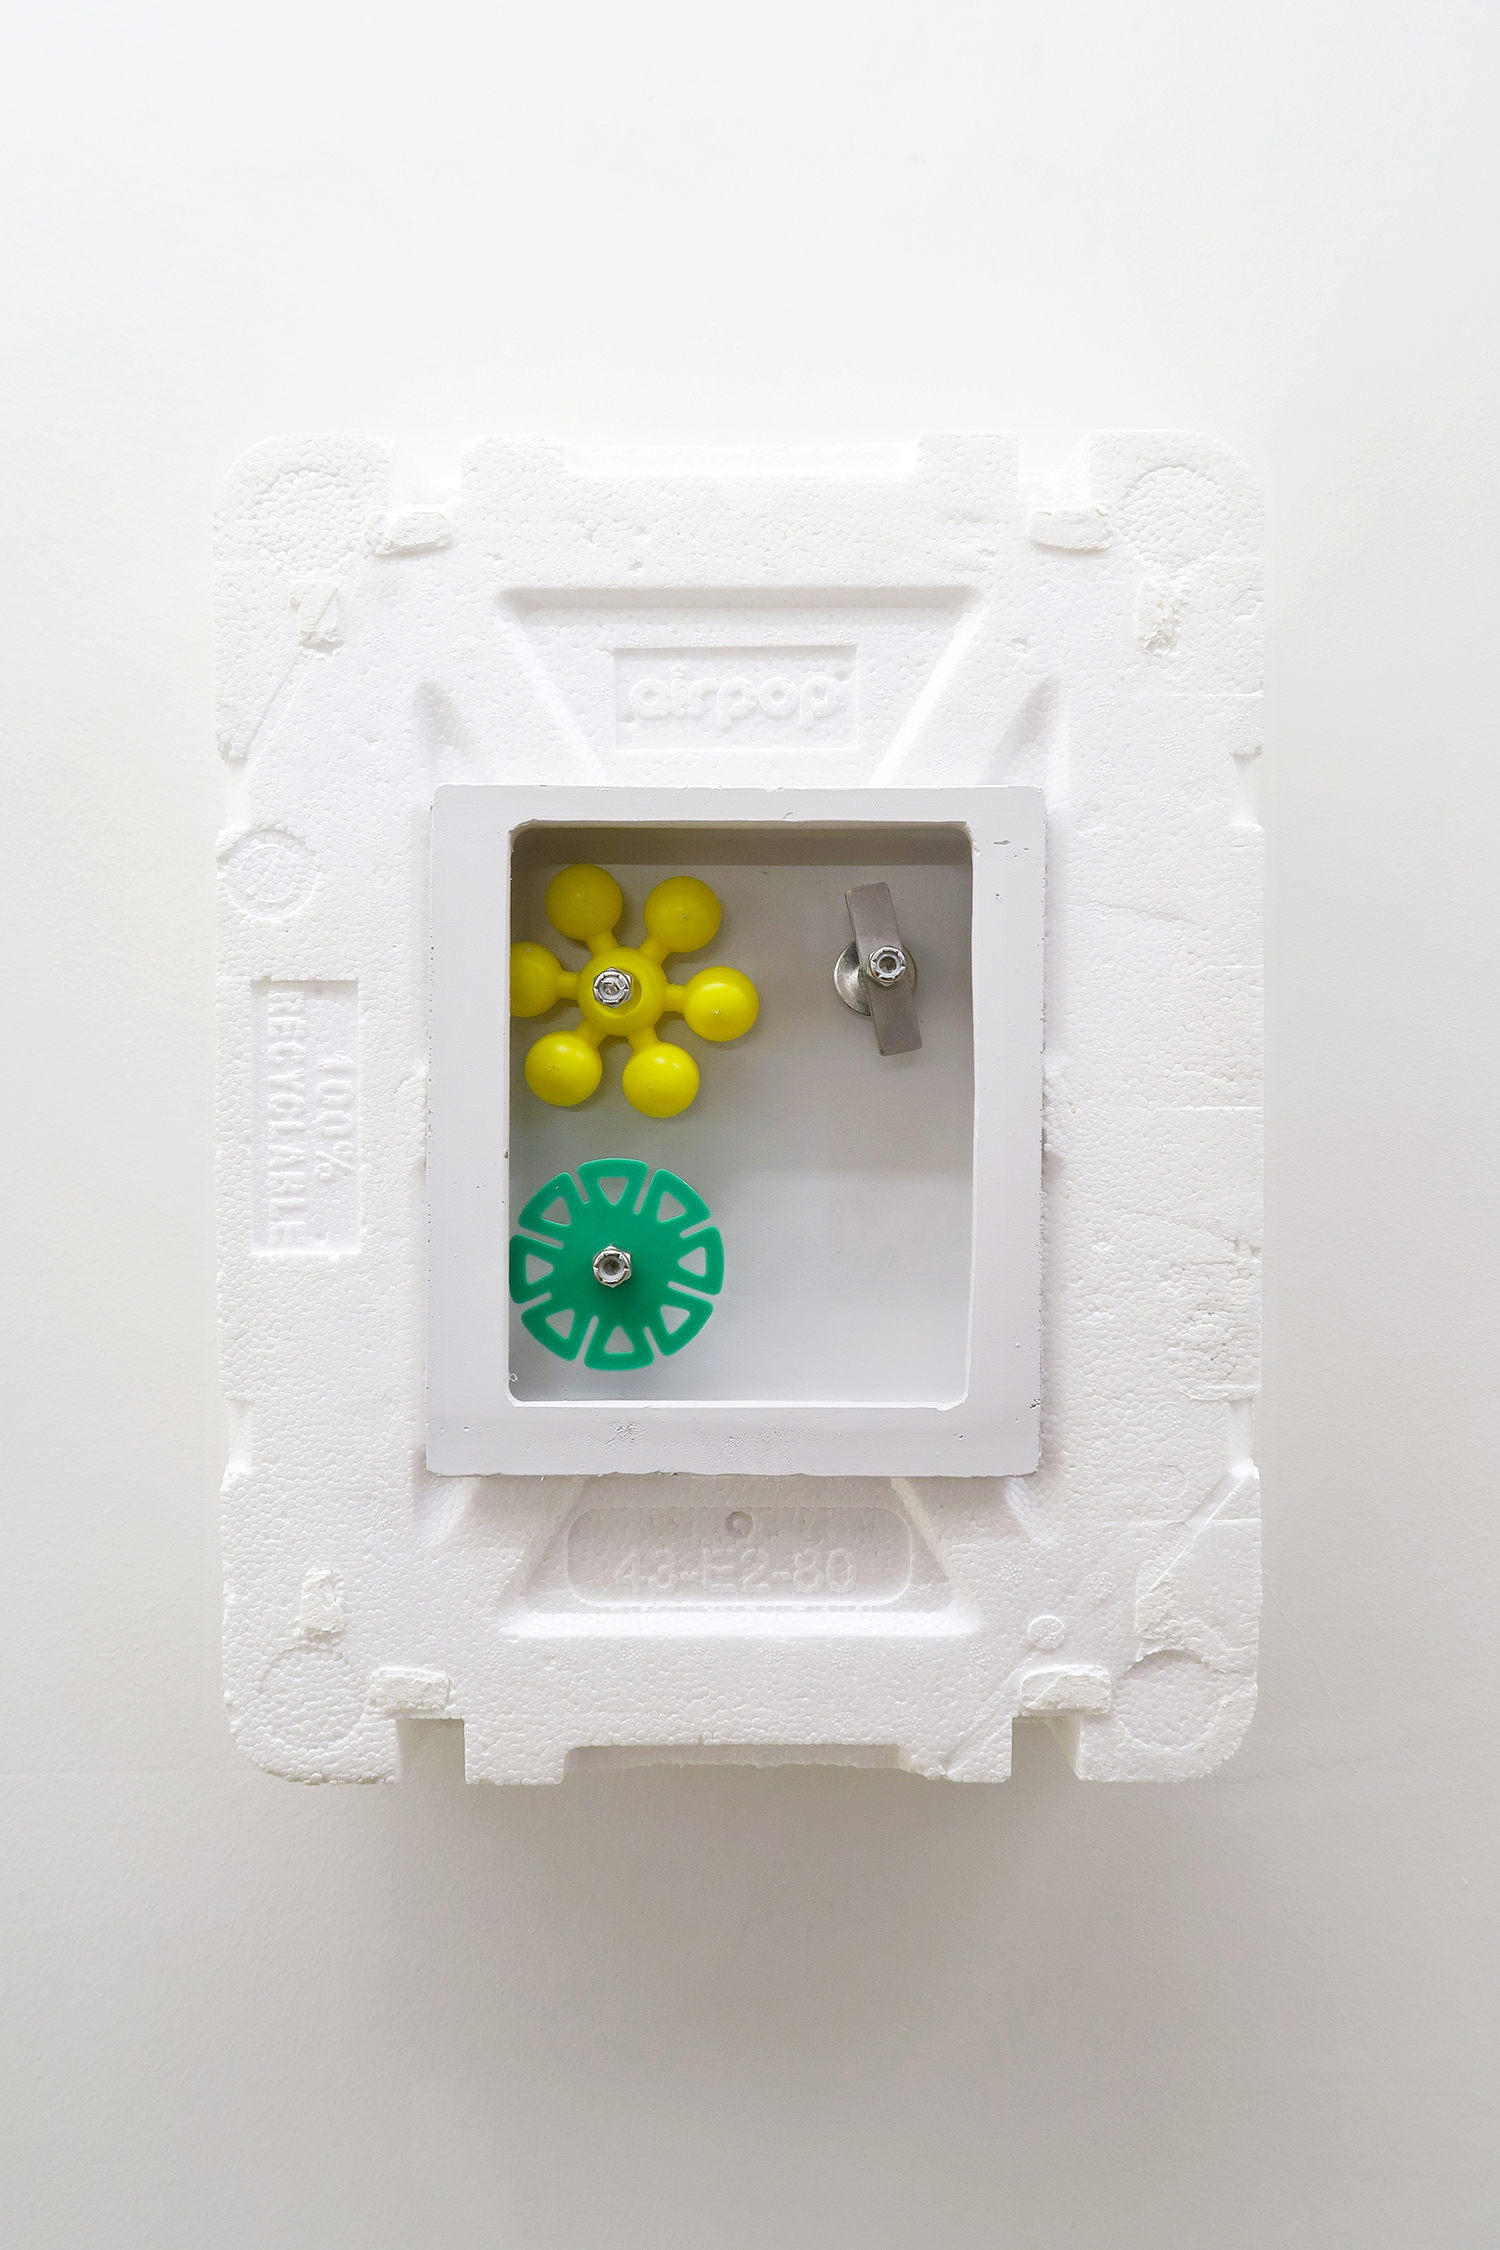 Simplify Complexity III, 2022 Styrofoam box, brightly colored plastic pieces spin easily on stainless steel rods,  26.5 × 40 × 13.5 cm